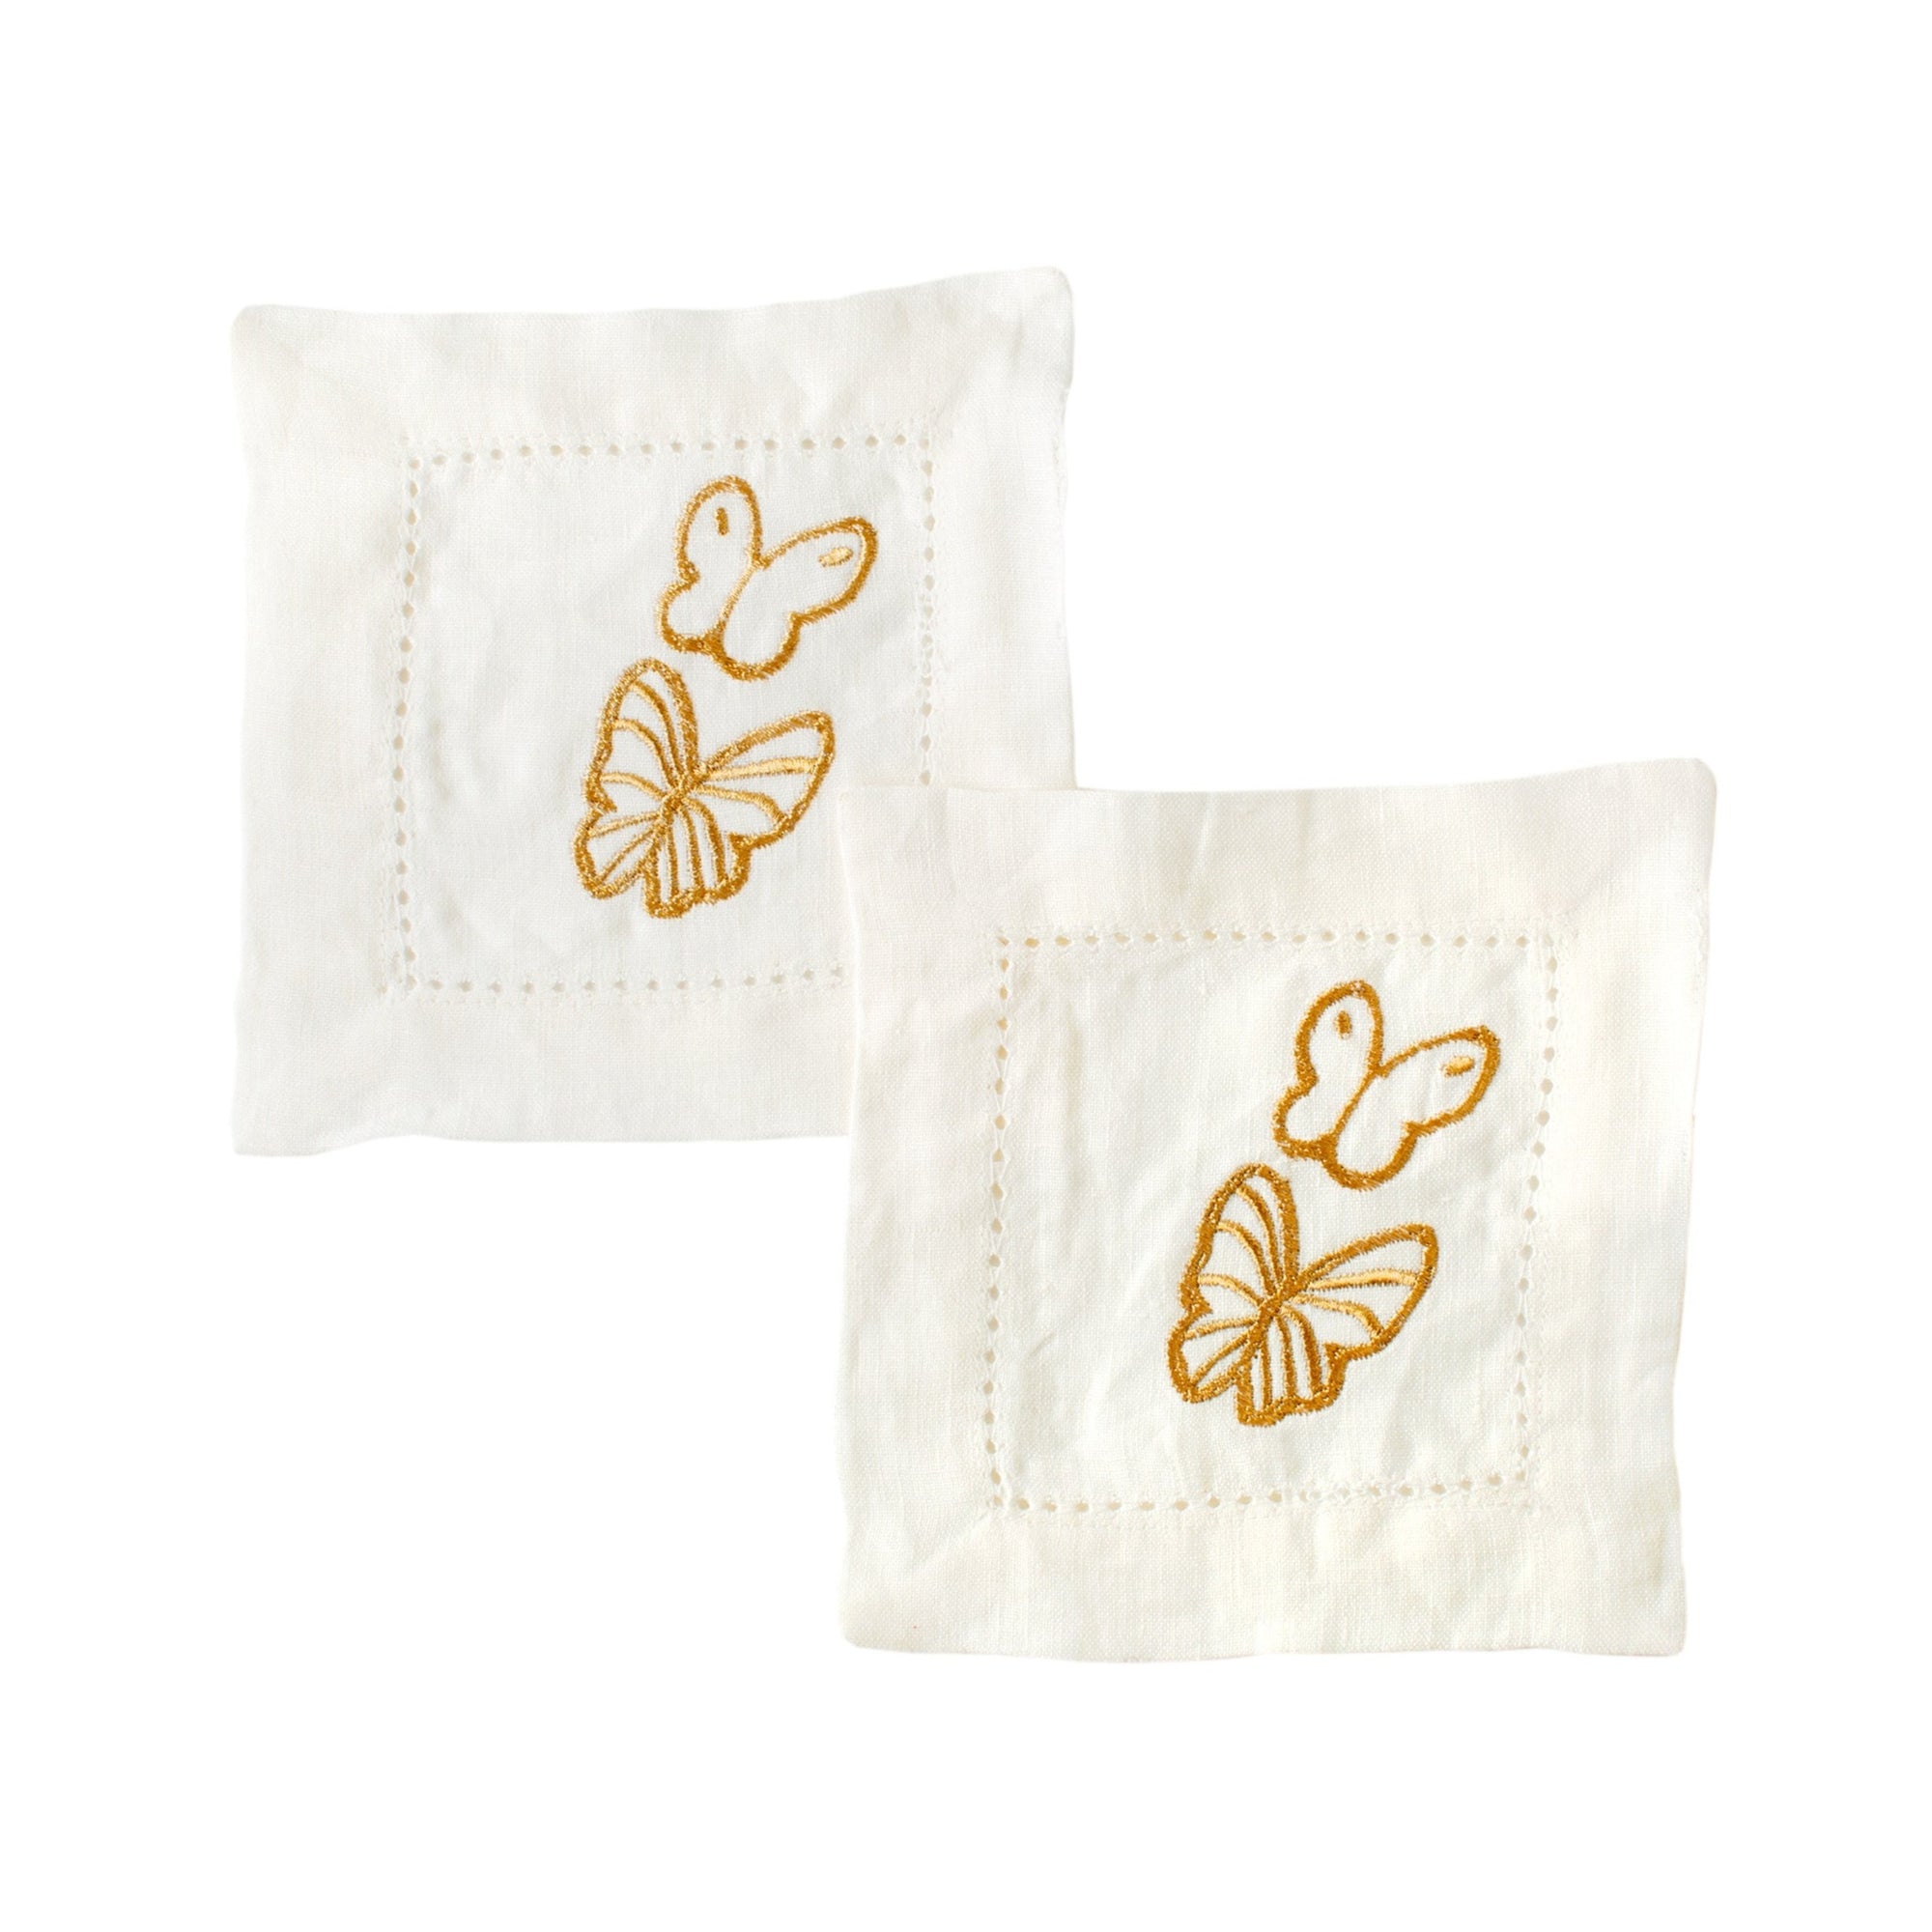 Gold Butterflies Embroidered Linen Cocktail Napkins in White, Set of 6 -  Hunt Slonem